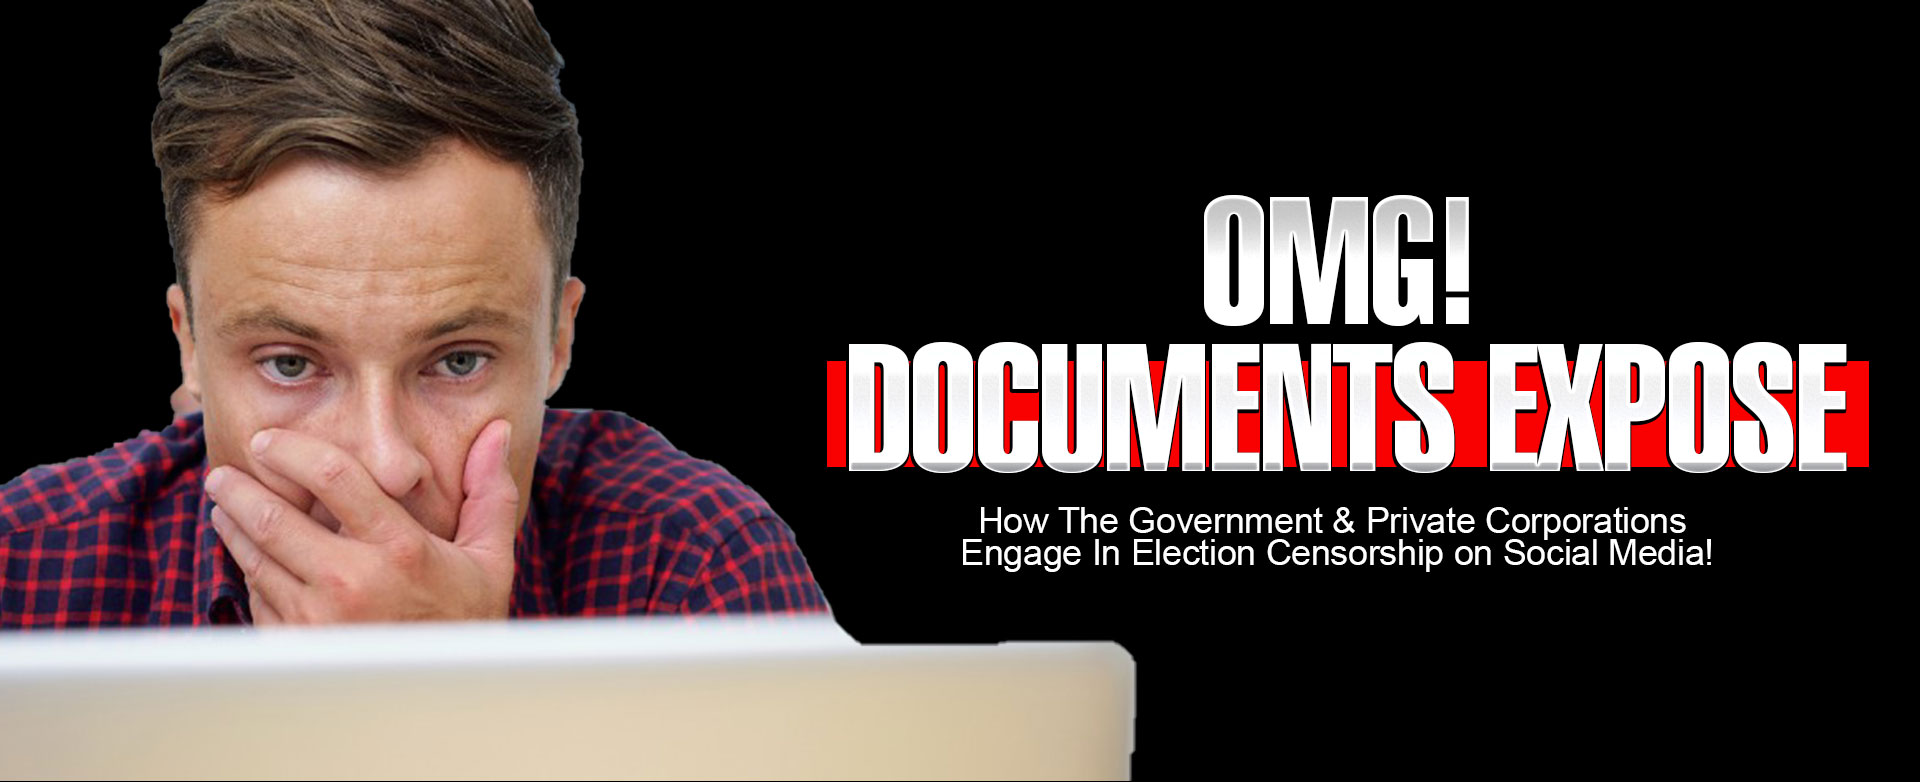 MyPatriotsNetwork-OMG! Documents Expose How The Government & Private Corporations Engage In Election Censorship on Social Media!